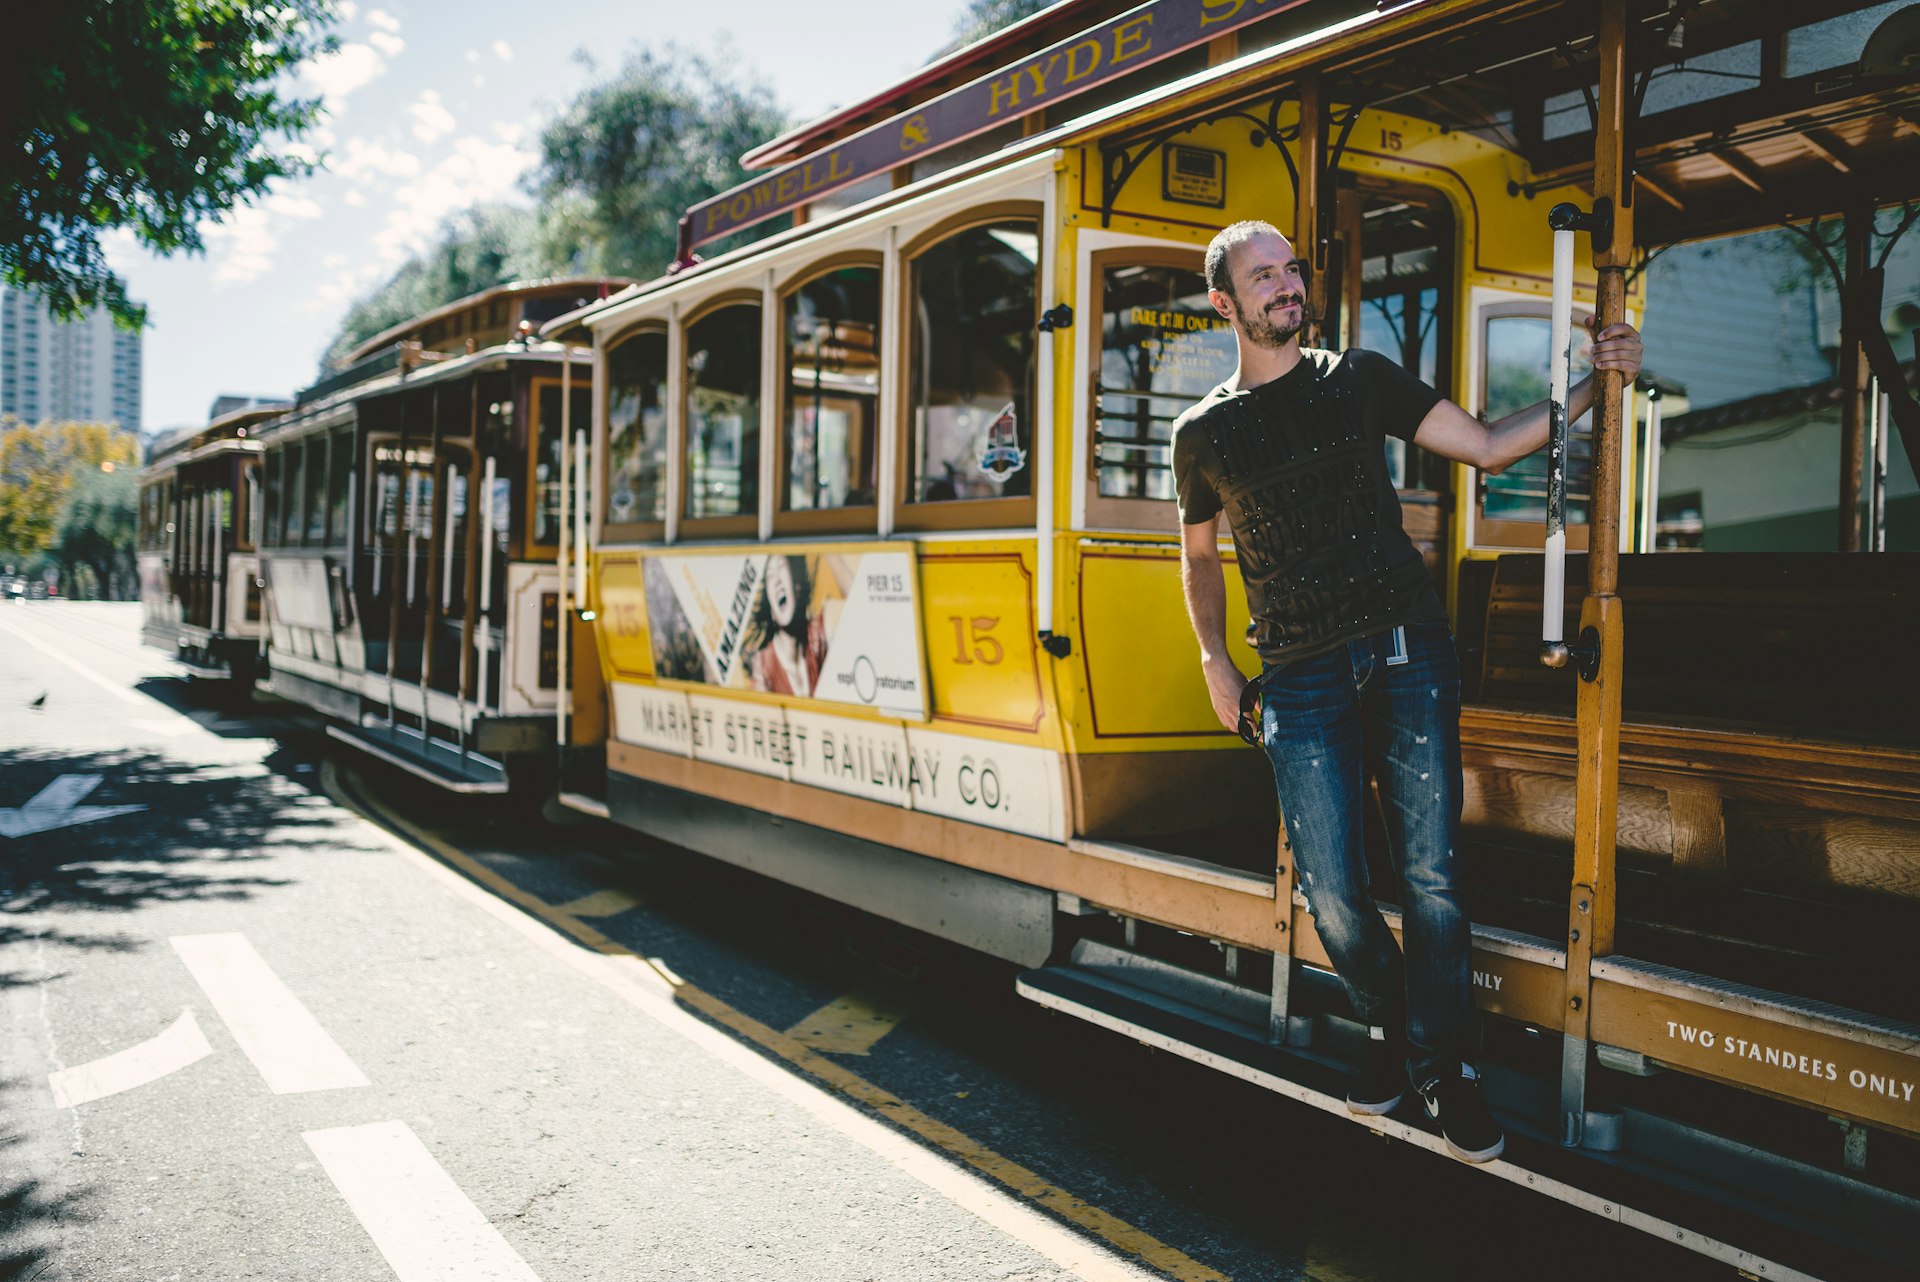 A man leans out of an open-sided cable car in San Francisco